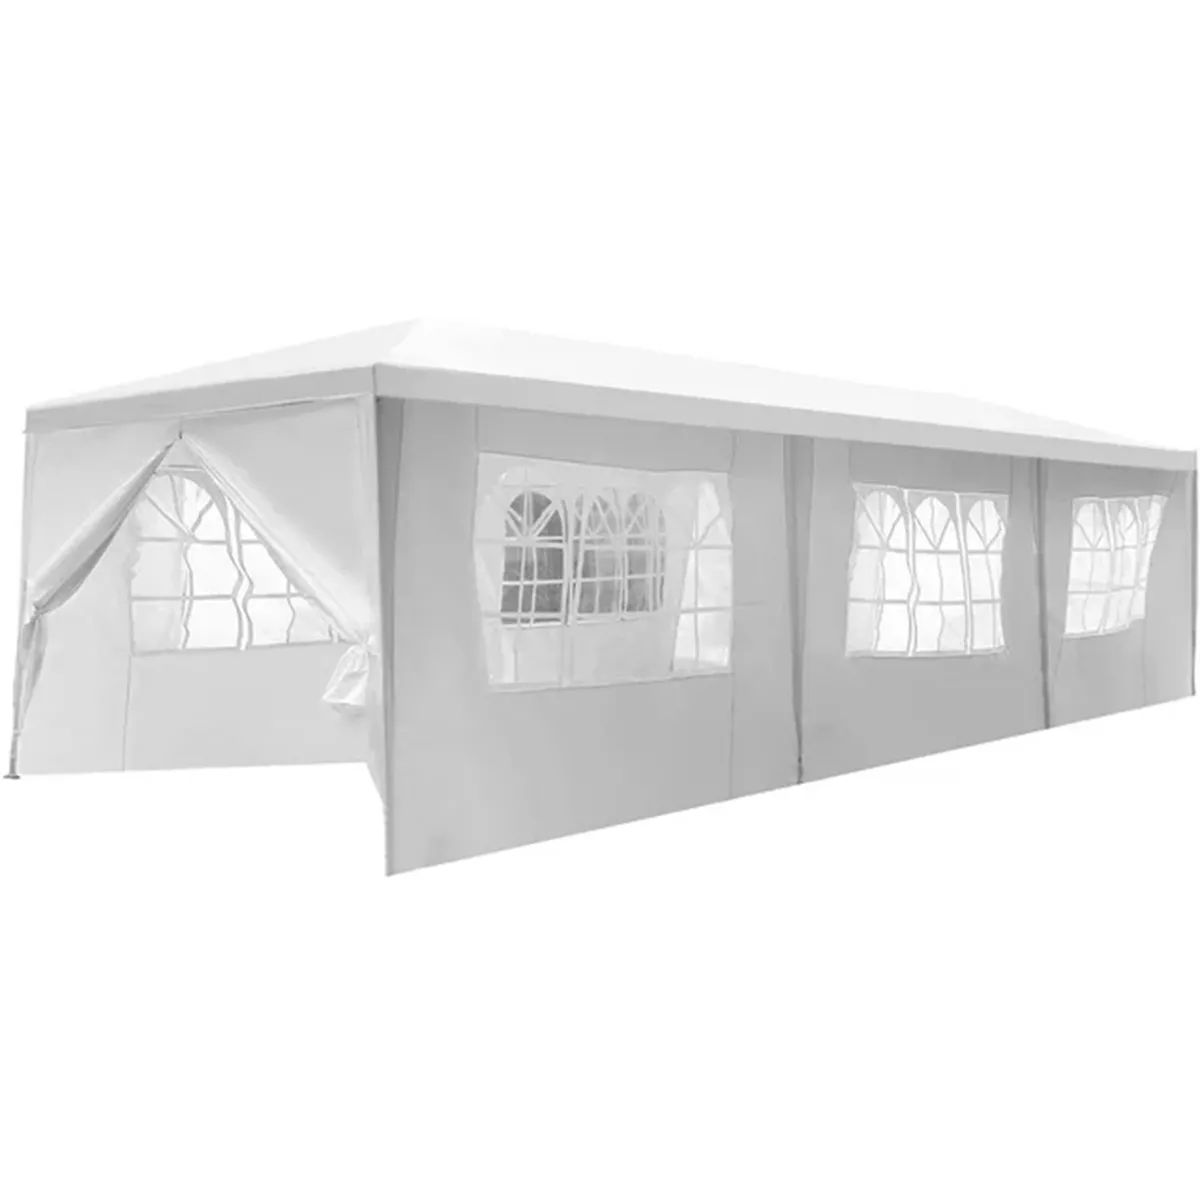 SKONYON 10'x30' Outdoor Canopy Party Wedding Tent White Gazebo with 8 Side Walls | Target